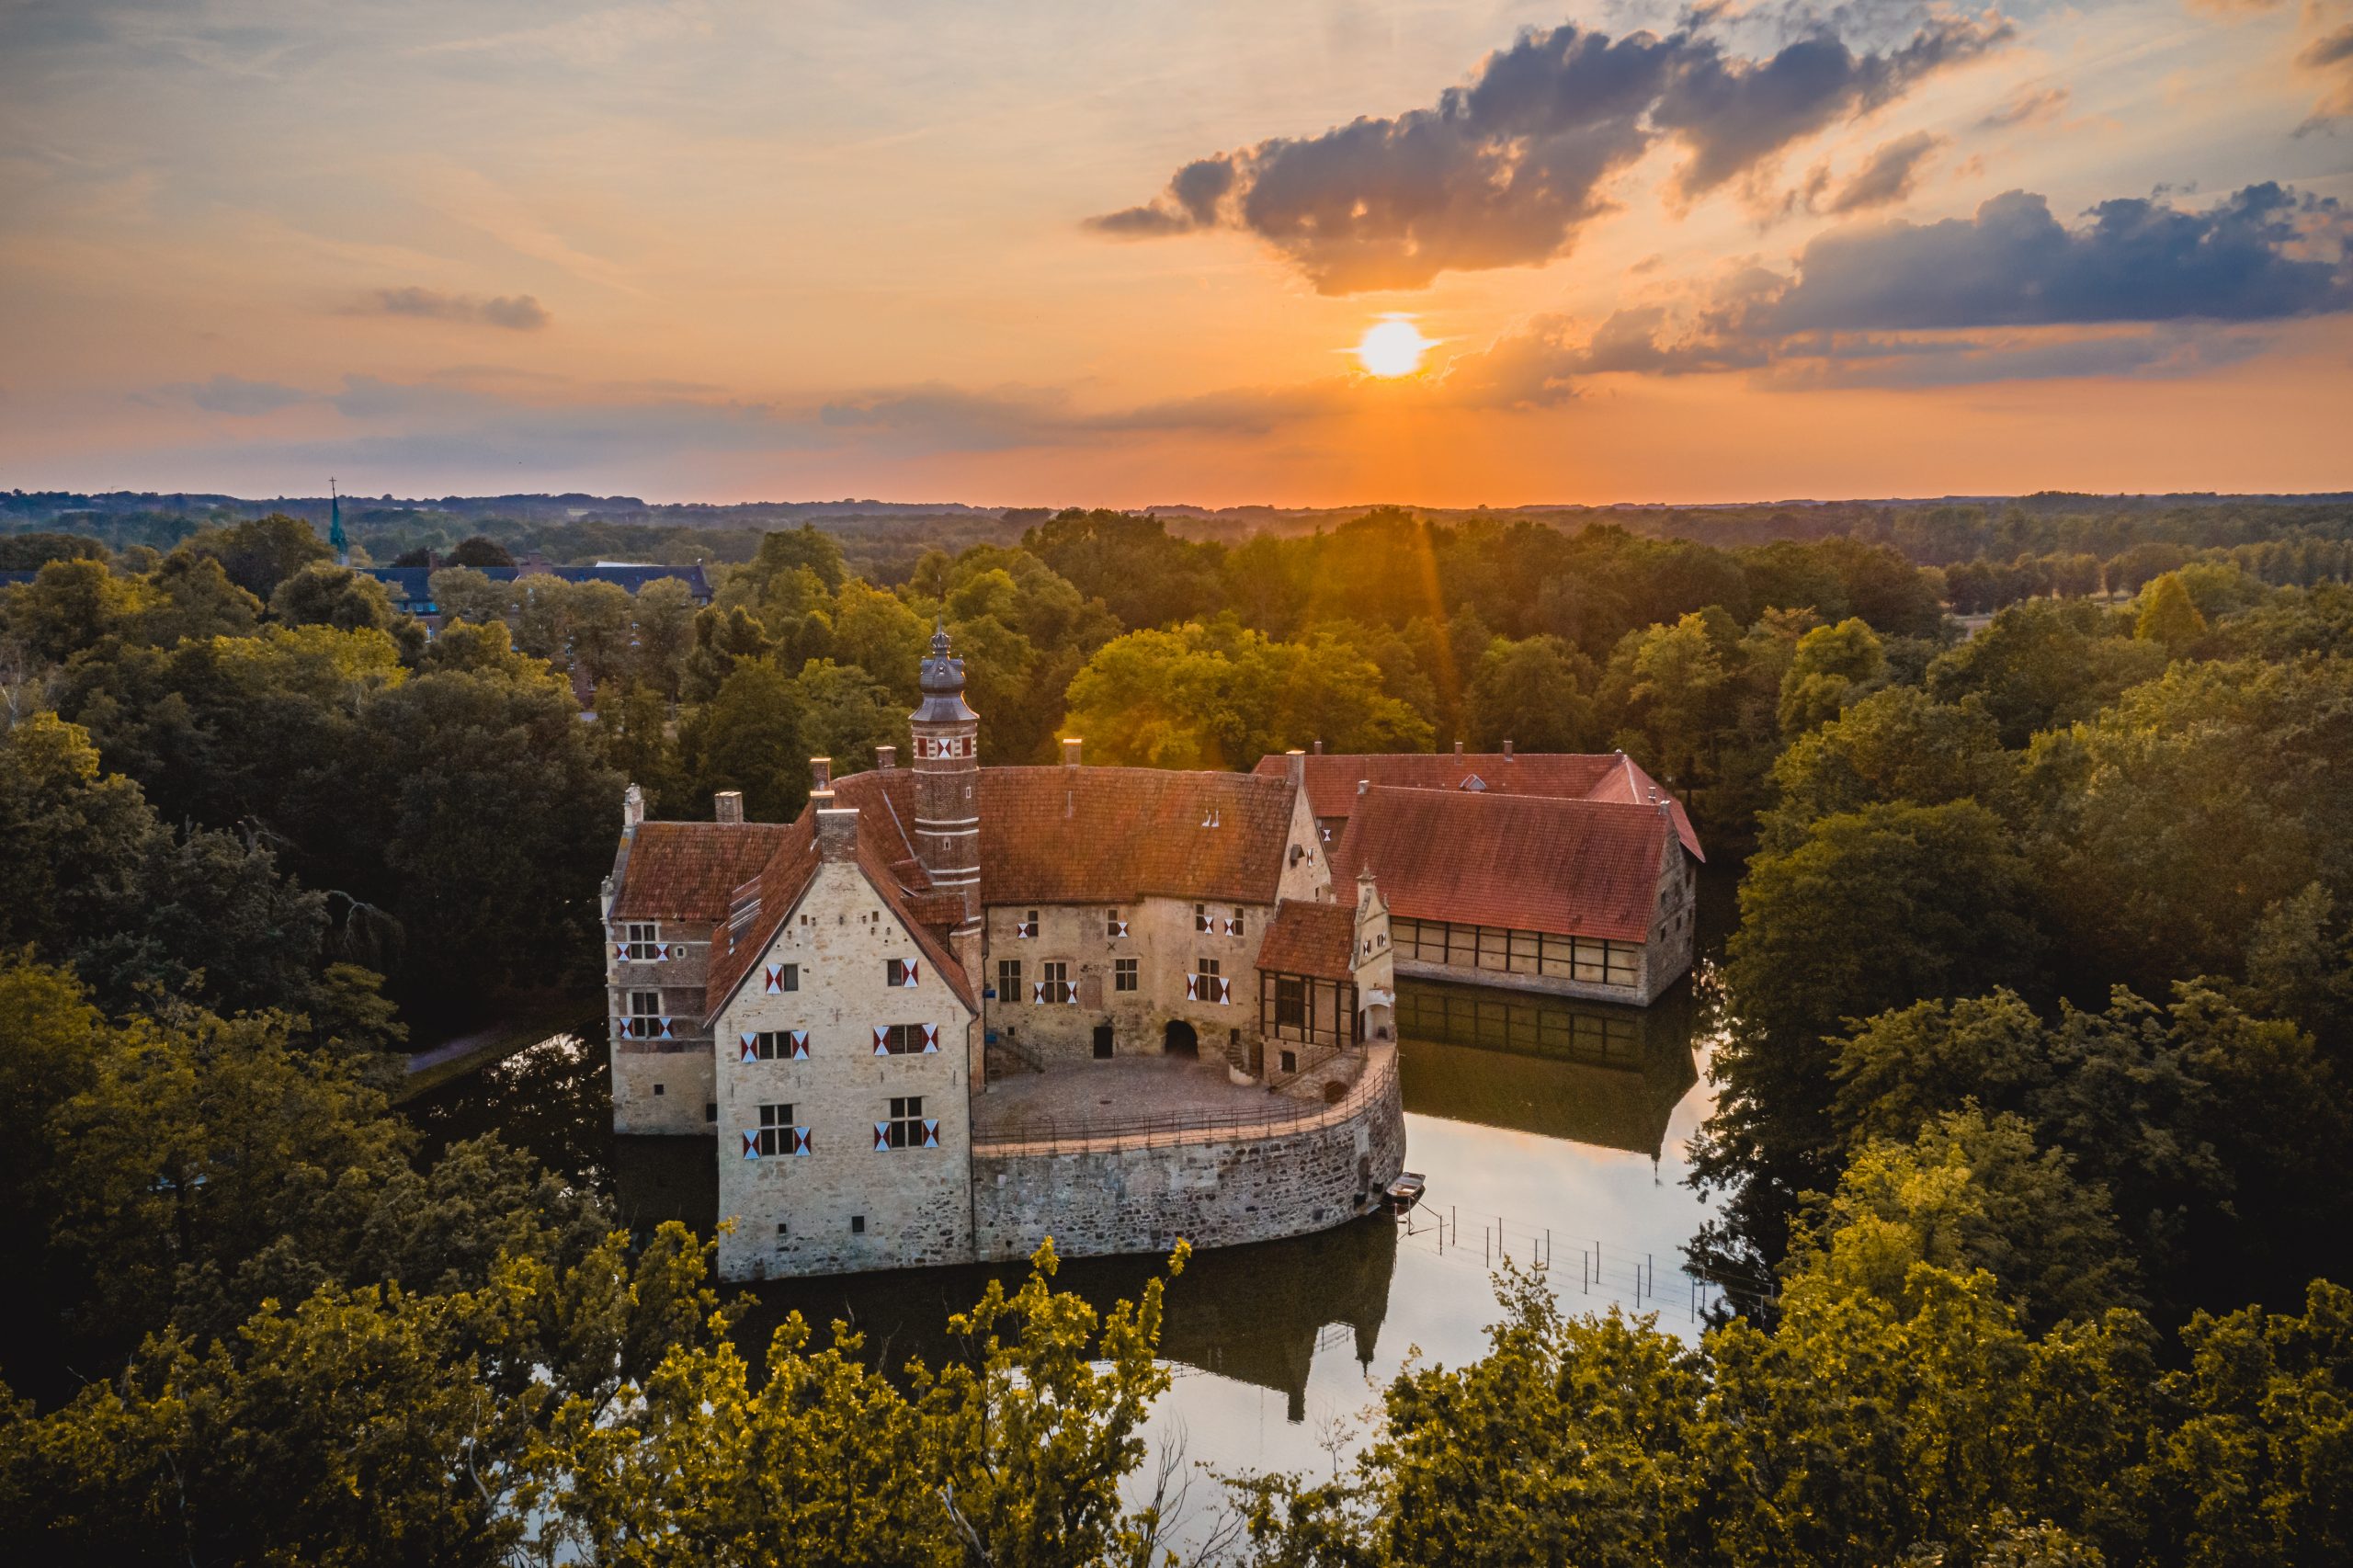 General 2560x1706 architecture castle old building nature Vischering castle lake landscape aerial view Germany trees Sun forest clouds sky sunset sunset glow water building